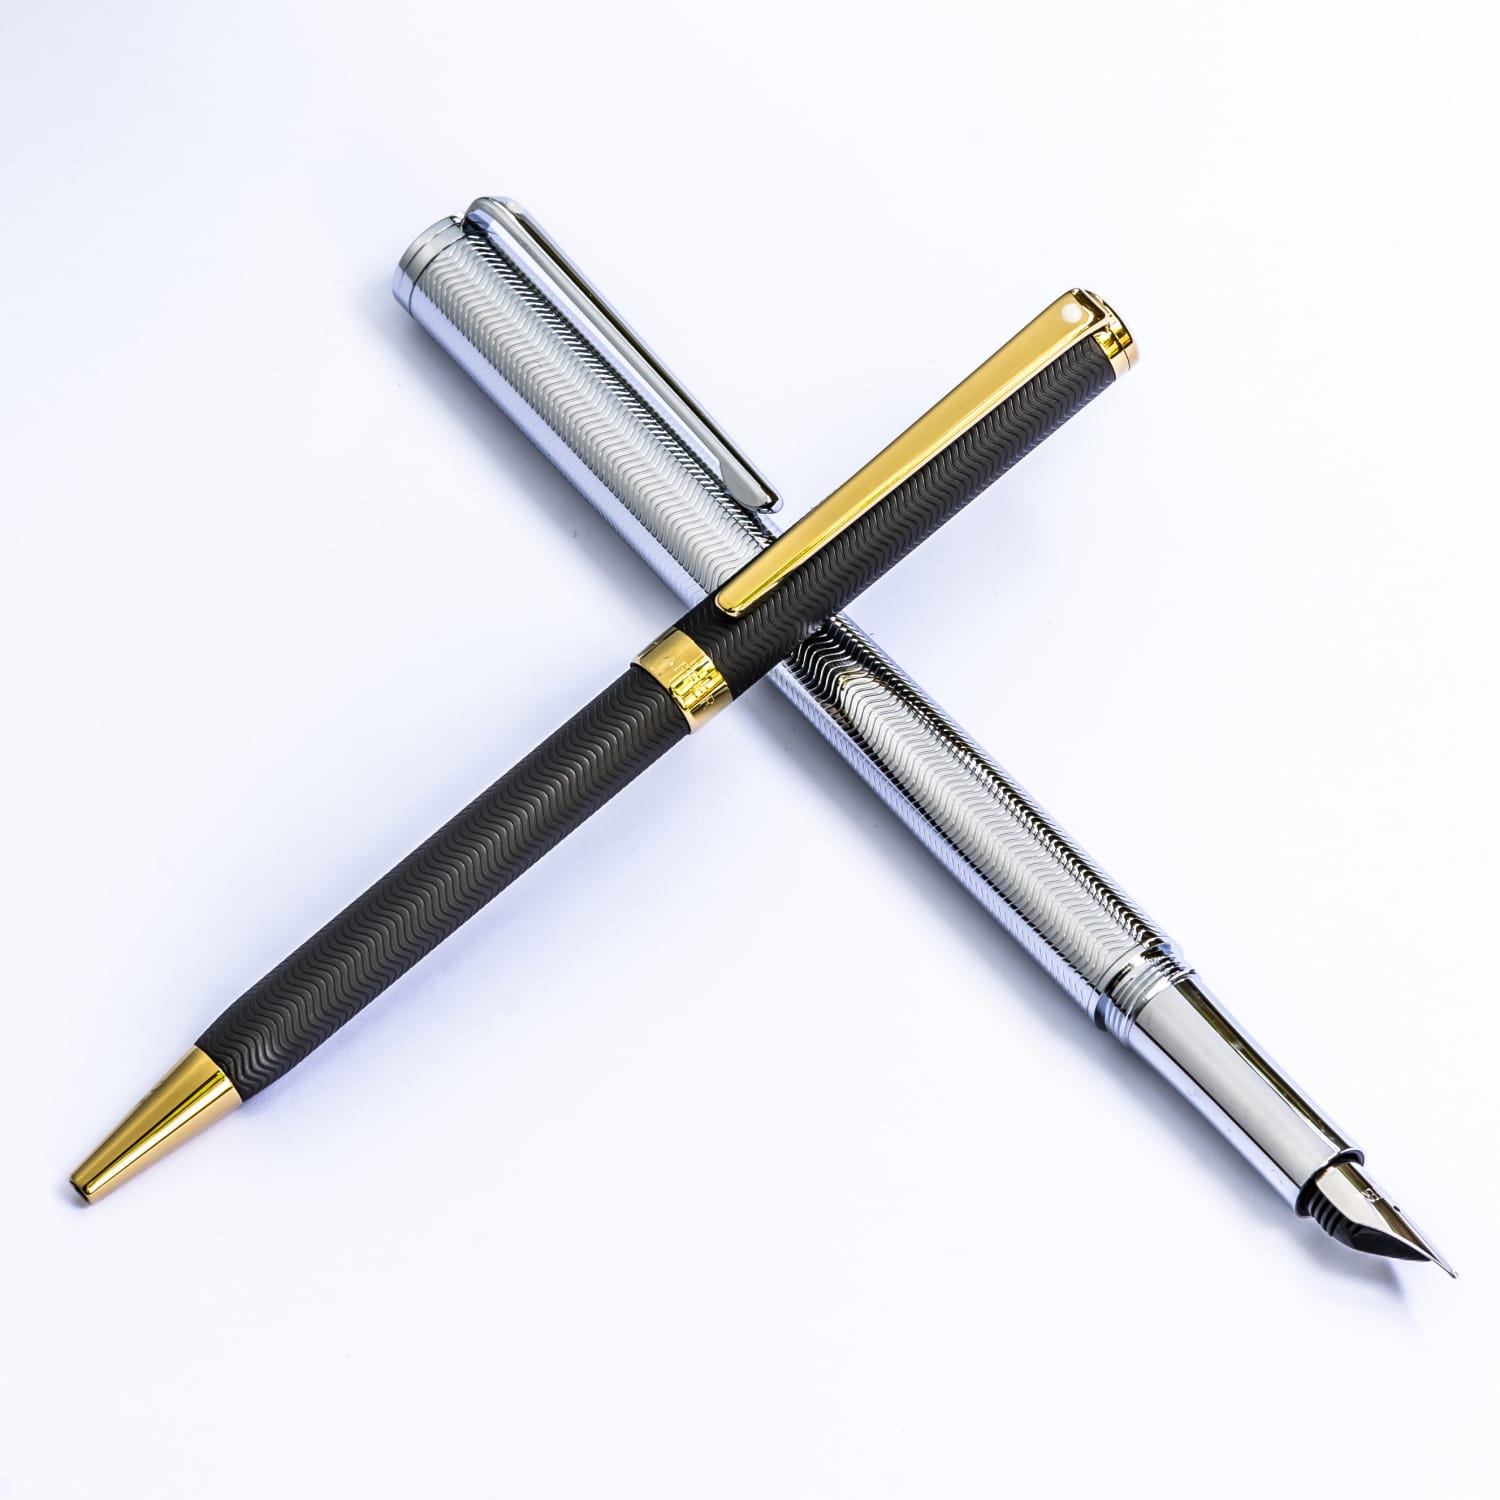 Sheaffer Intensity Carbon Fountain Pen Review - The Pen Company Blog